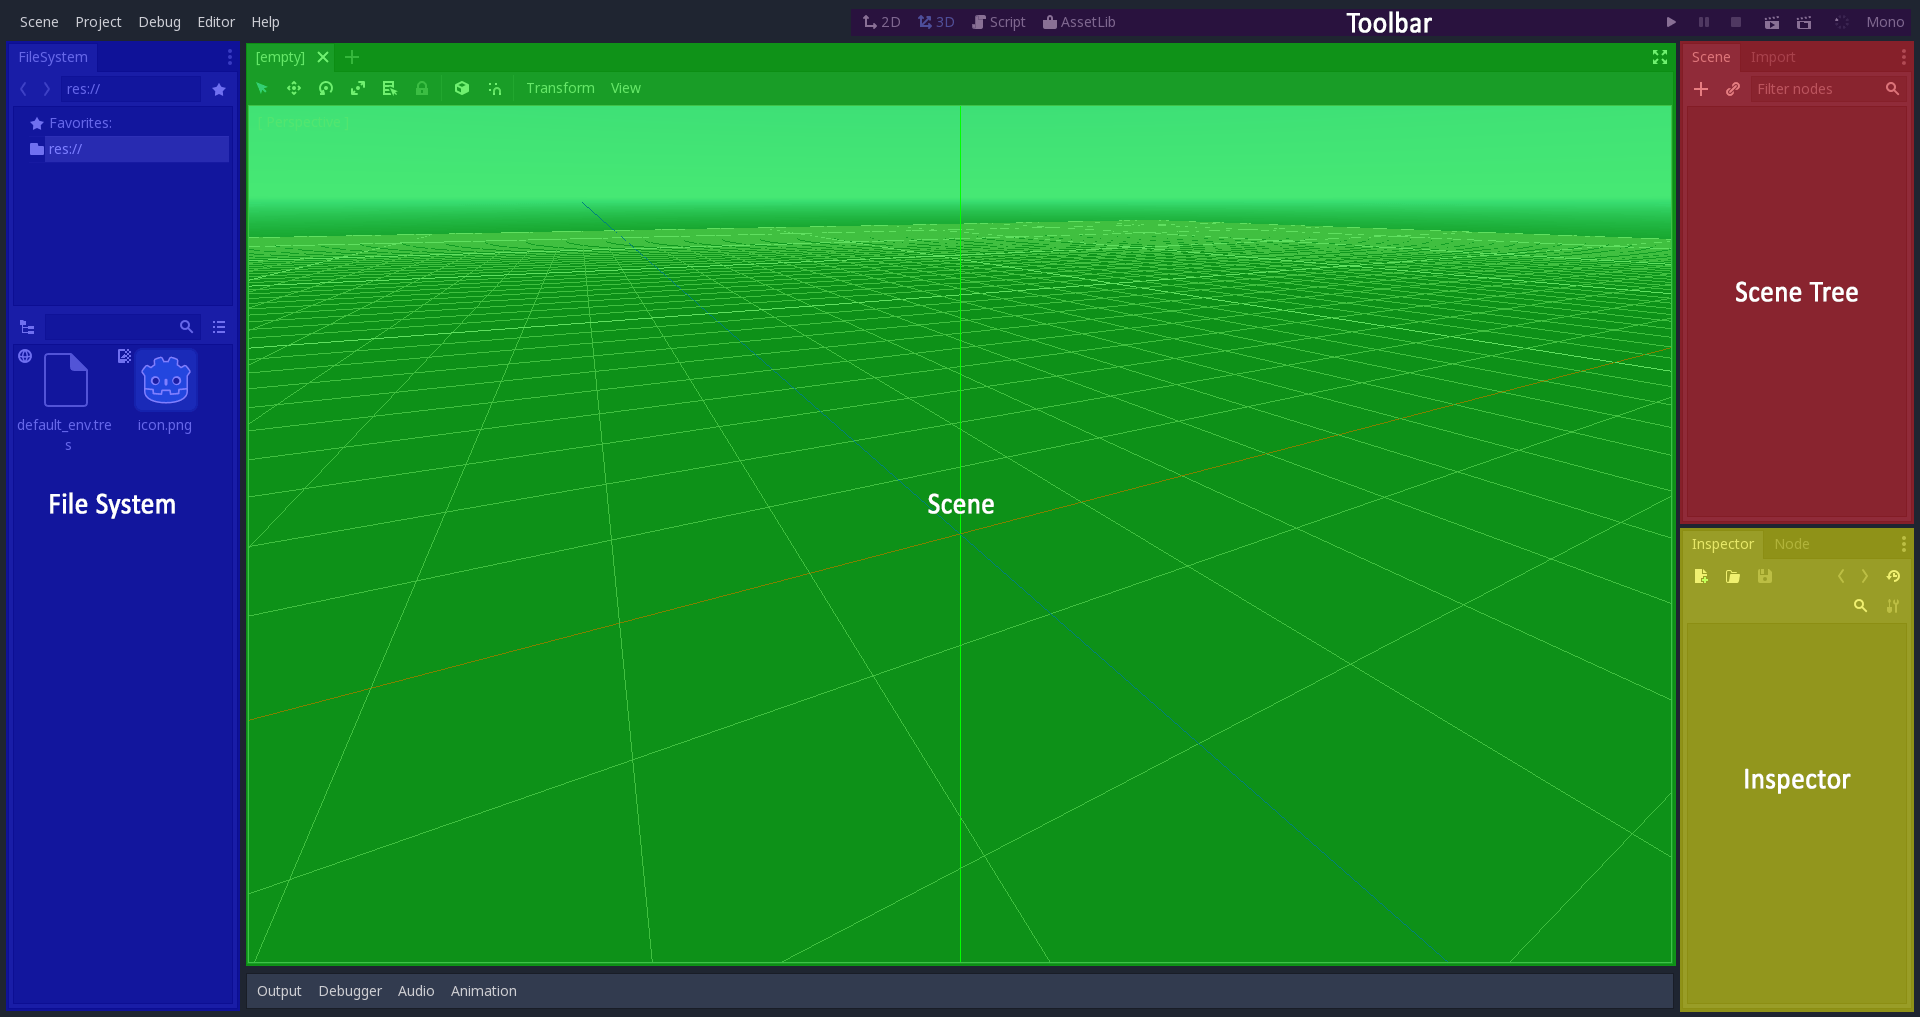 ../../_images/godot-gui-overlay.png